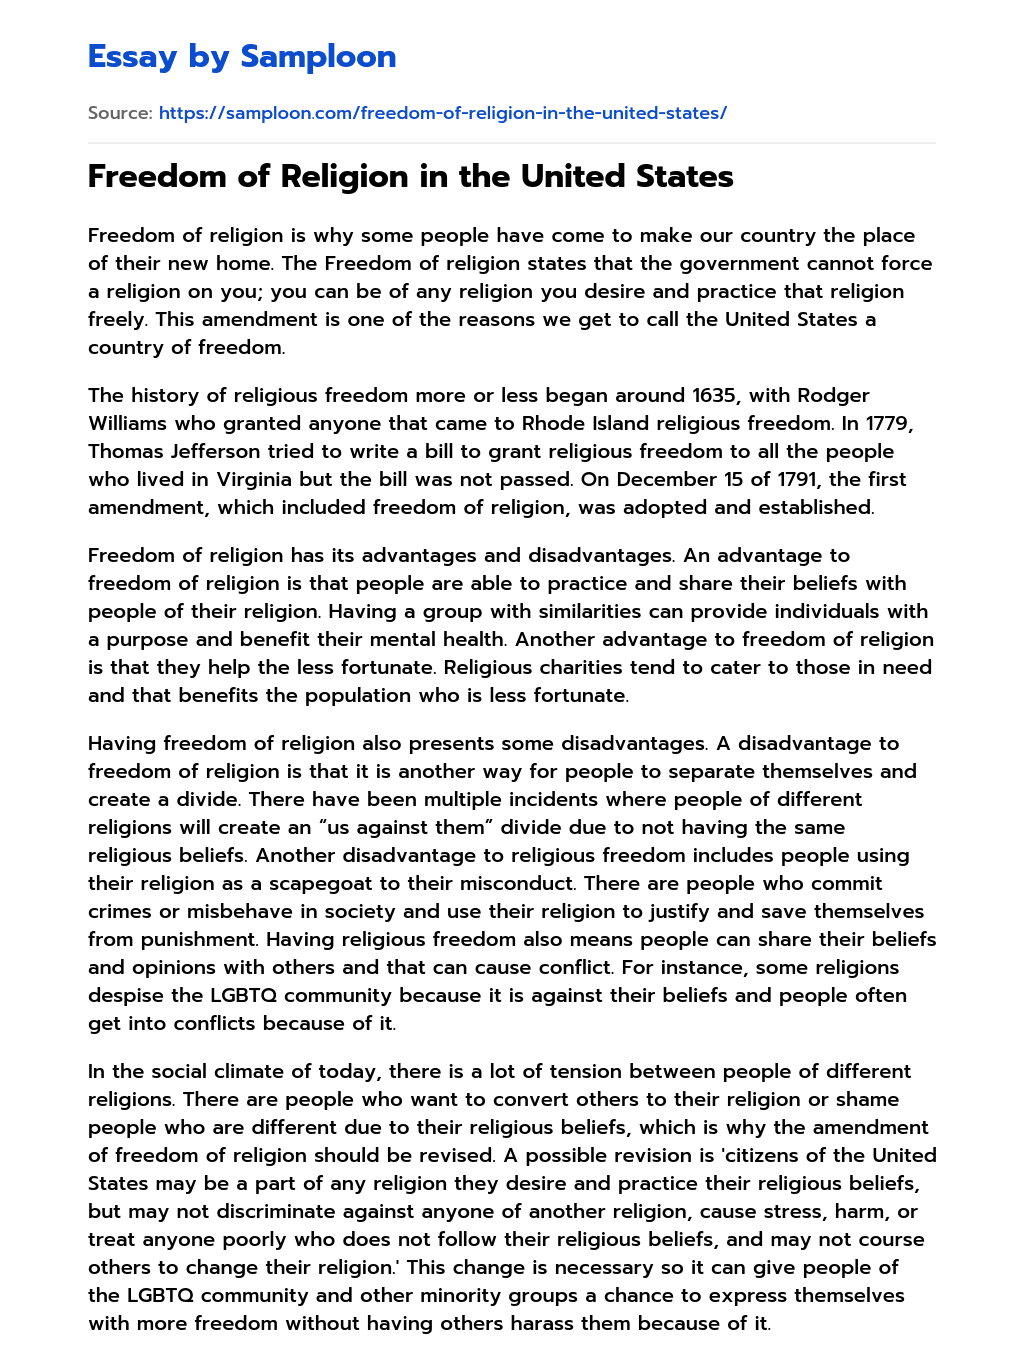 Freedom of Religion in the United States essay